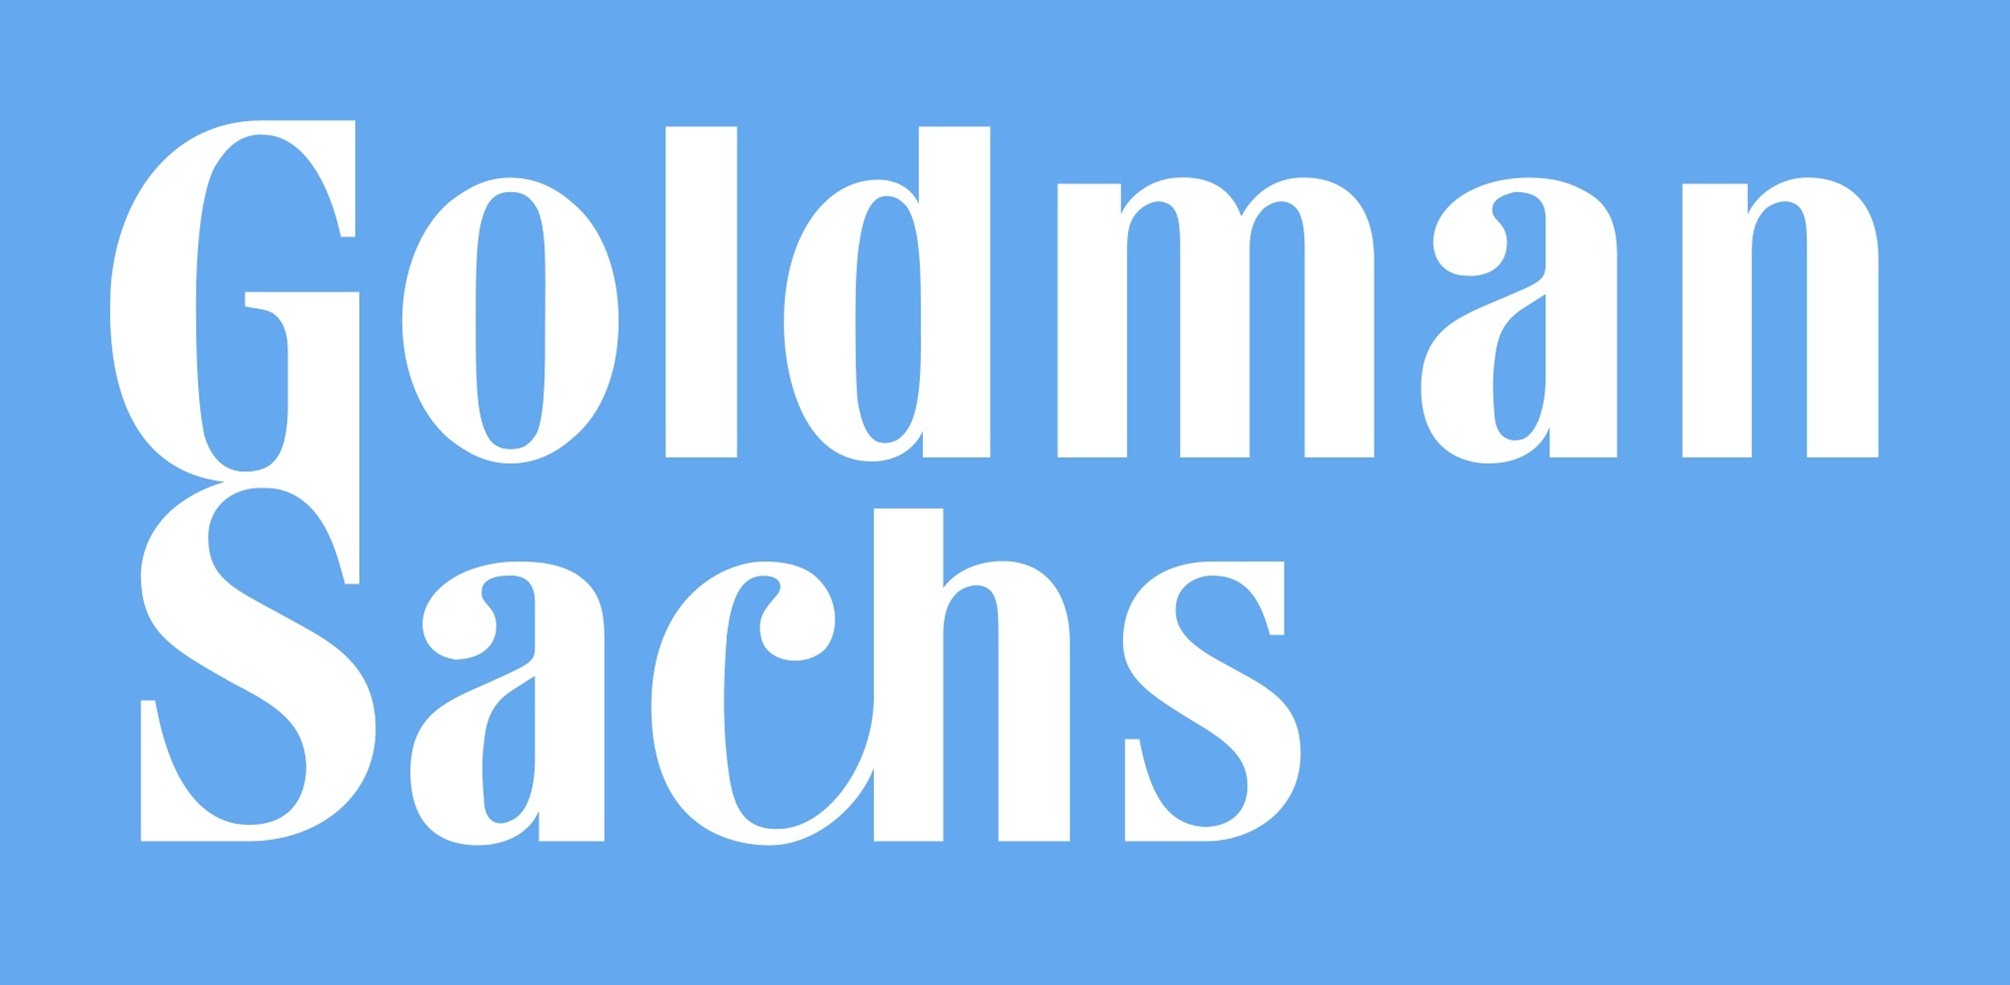 Search Results For Goldman Sachs